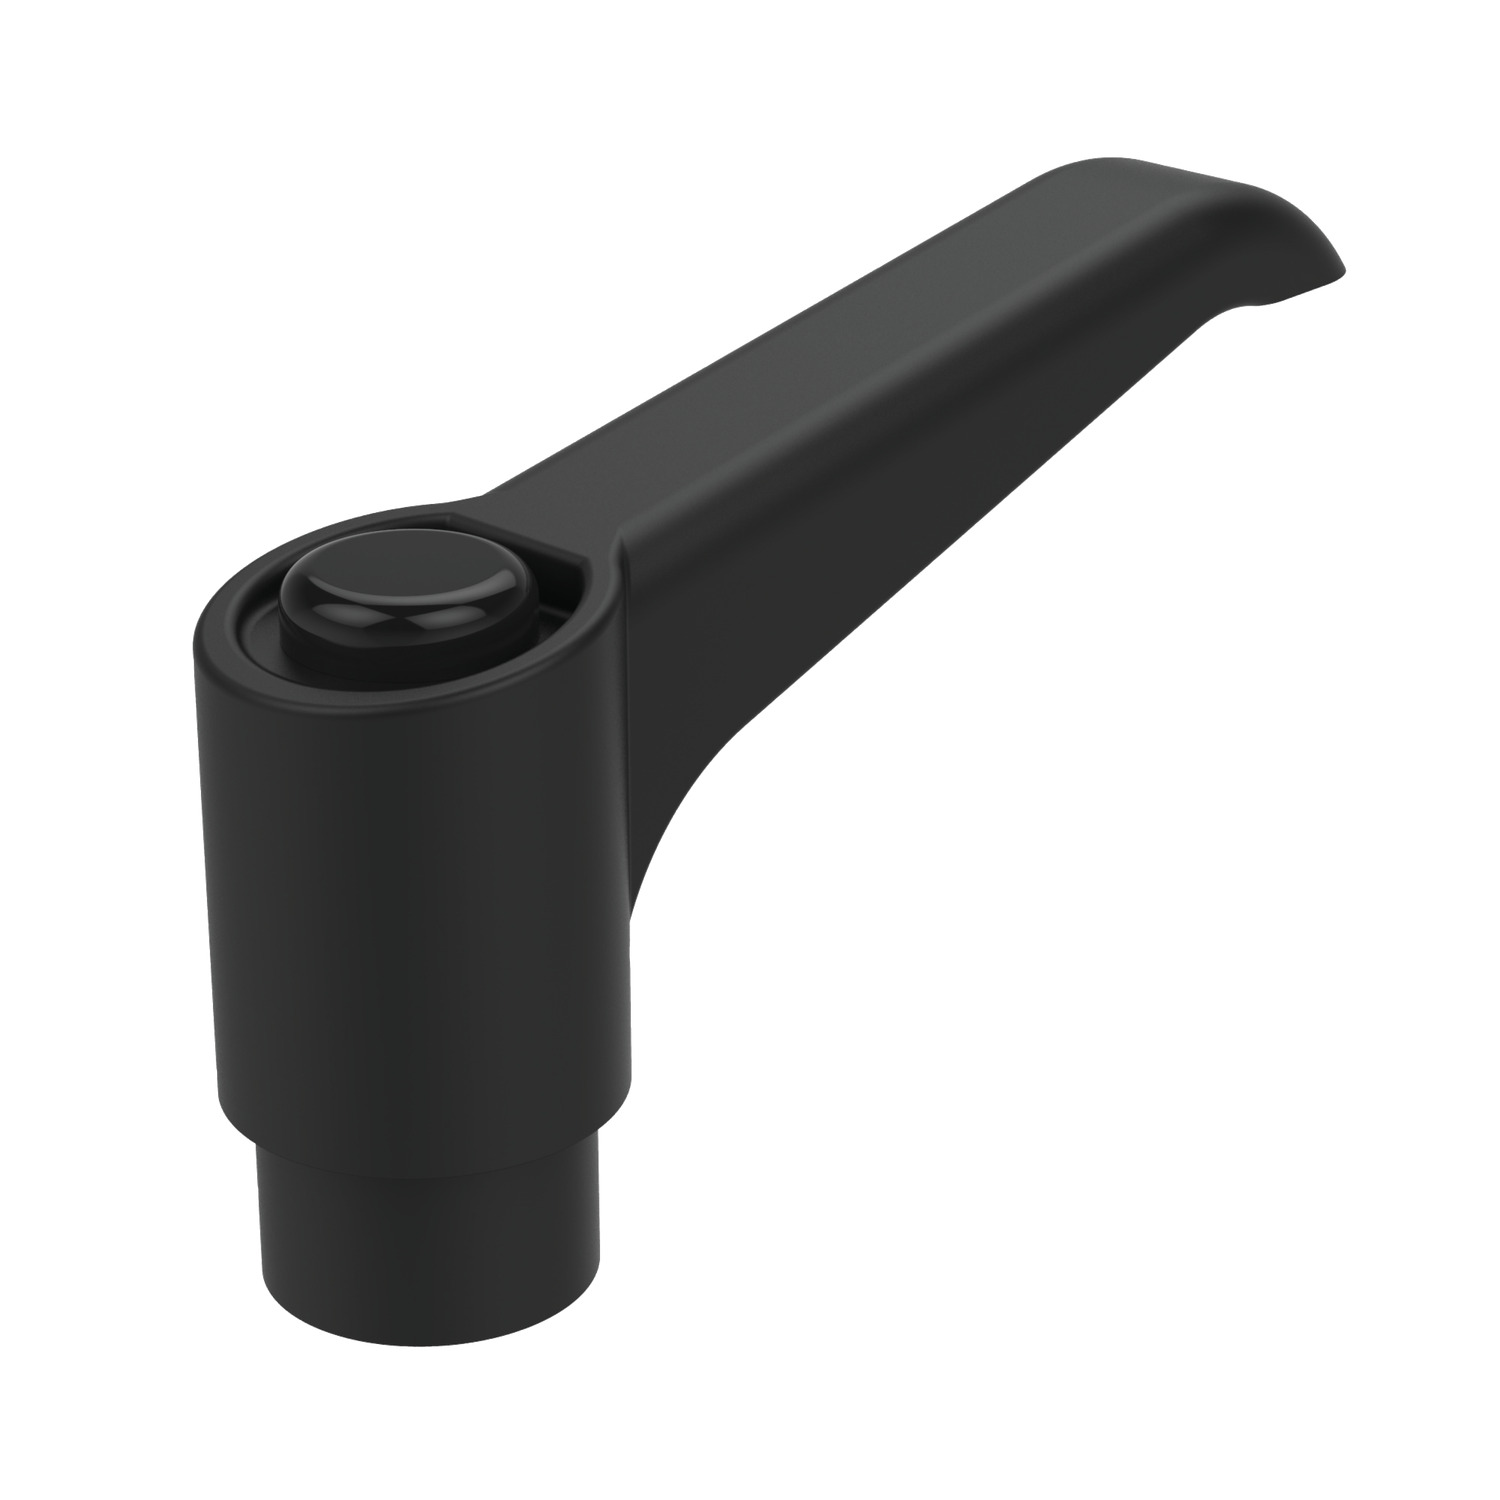 Clamping Levers - Adjustable - Plastic